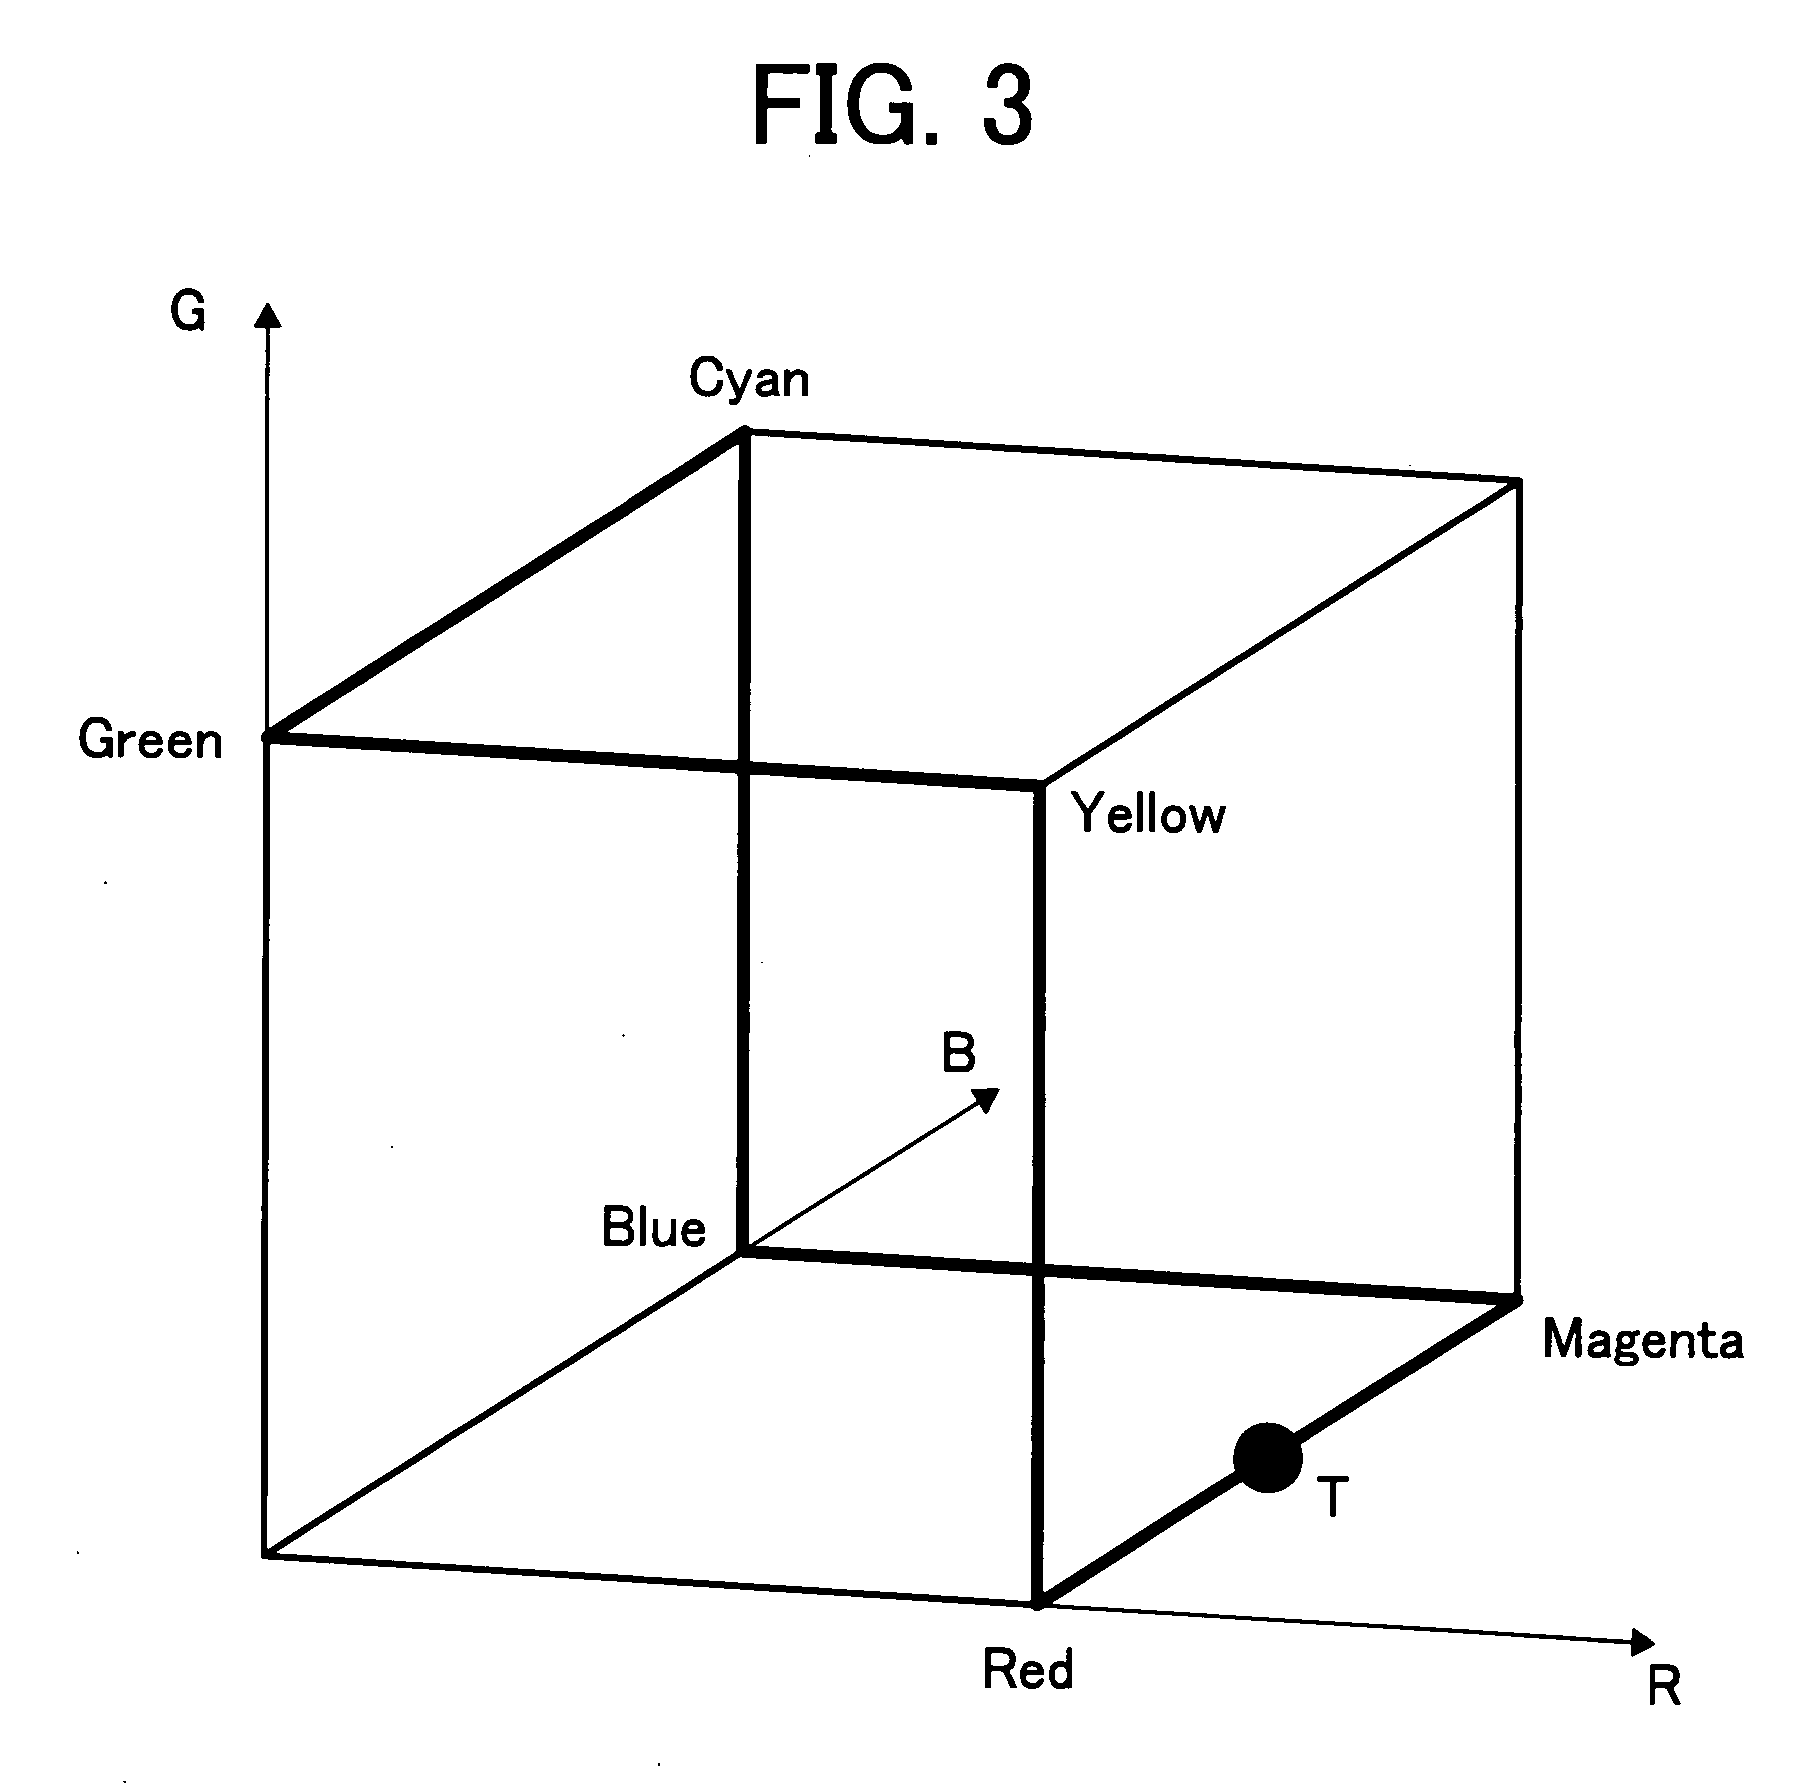 Image processing method, image processing apparatus, computer program product, and recording medium for image processing